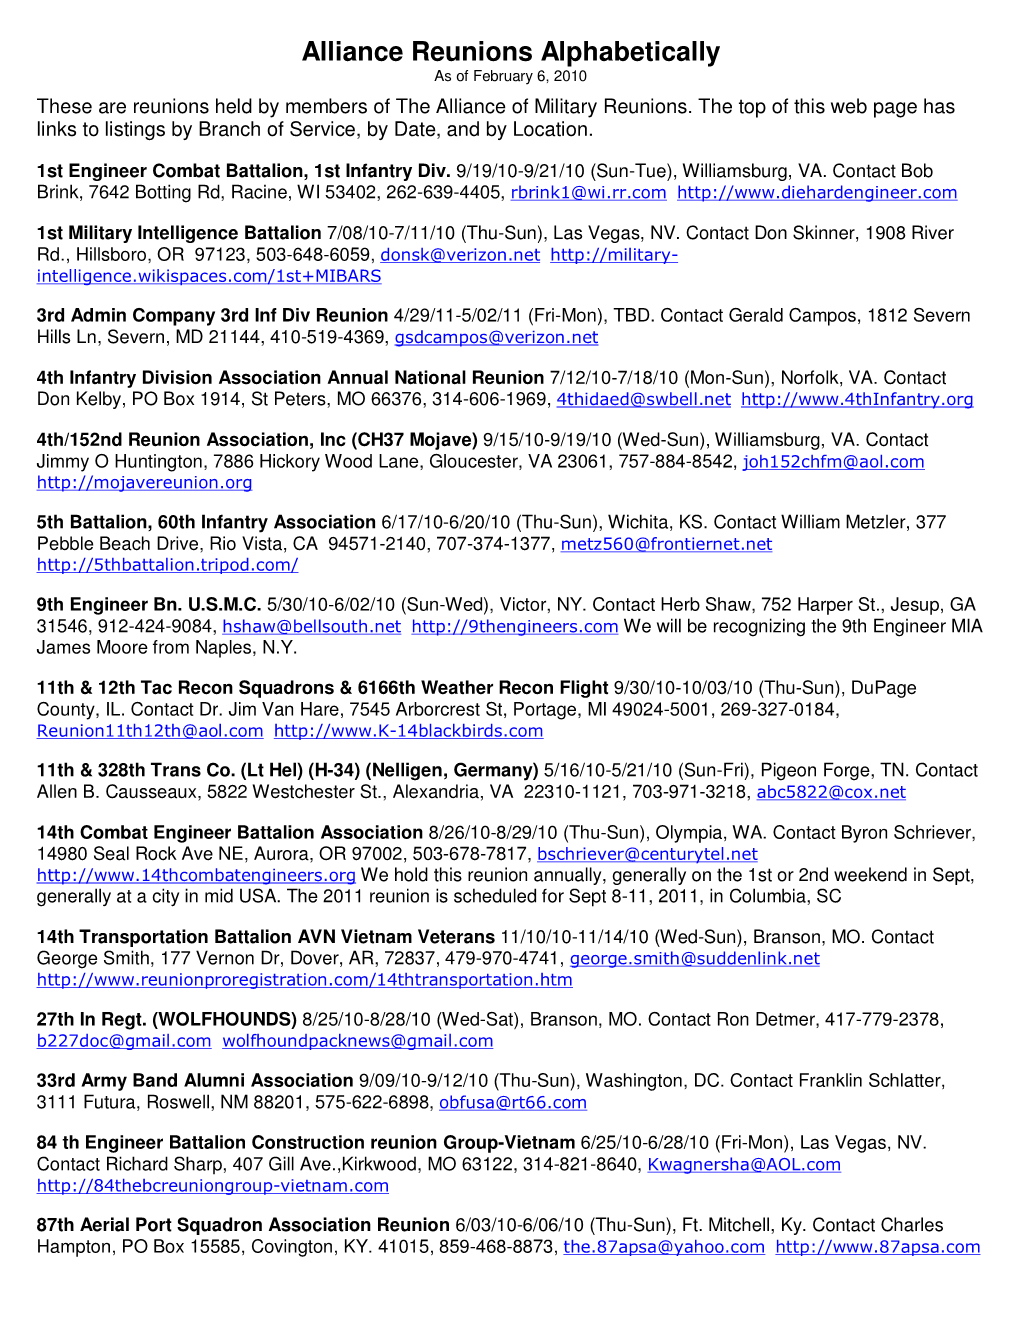 Alliance Reunions Alphabetically As of February 6, 2010 These Are Reunions Held by Members of the Alliance of Military Reunions